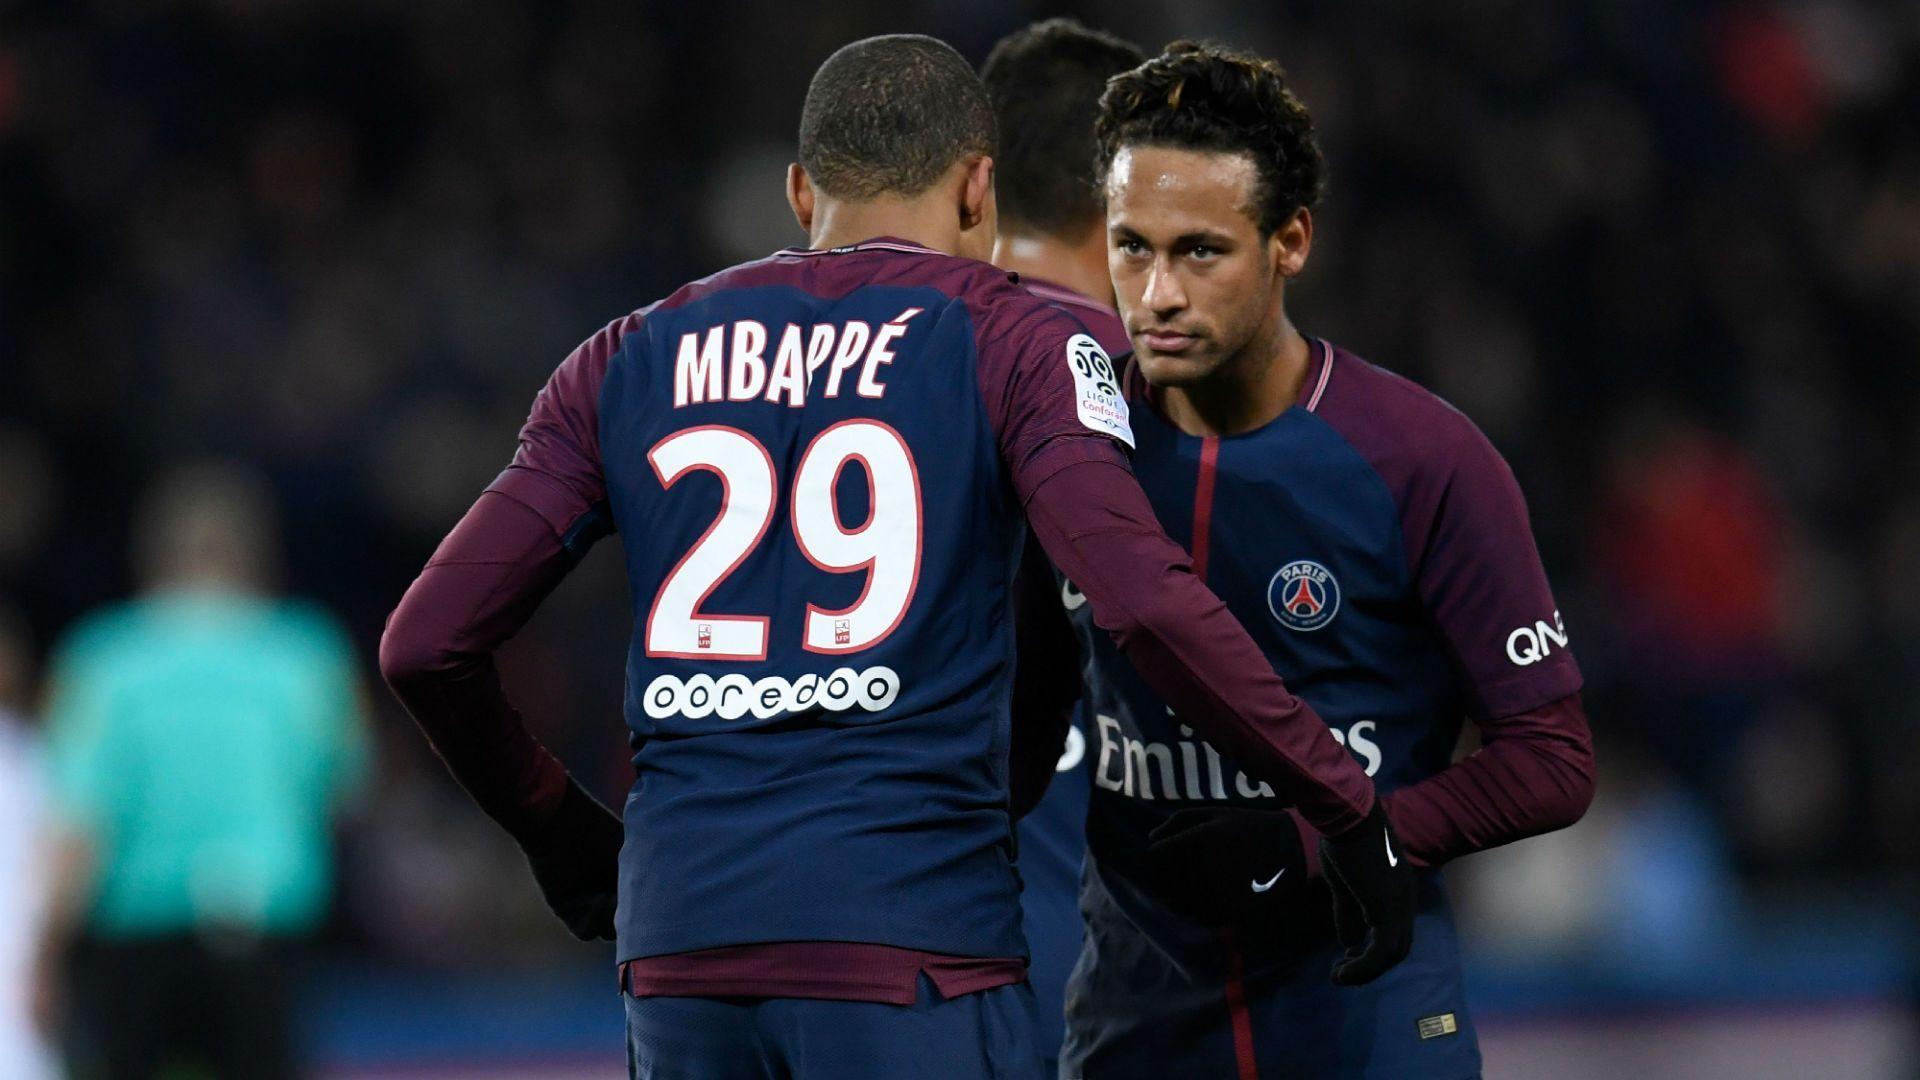 Neymar to Real Madrid links 'nothing but hot air', insists Mbappe